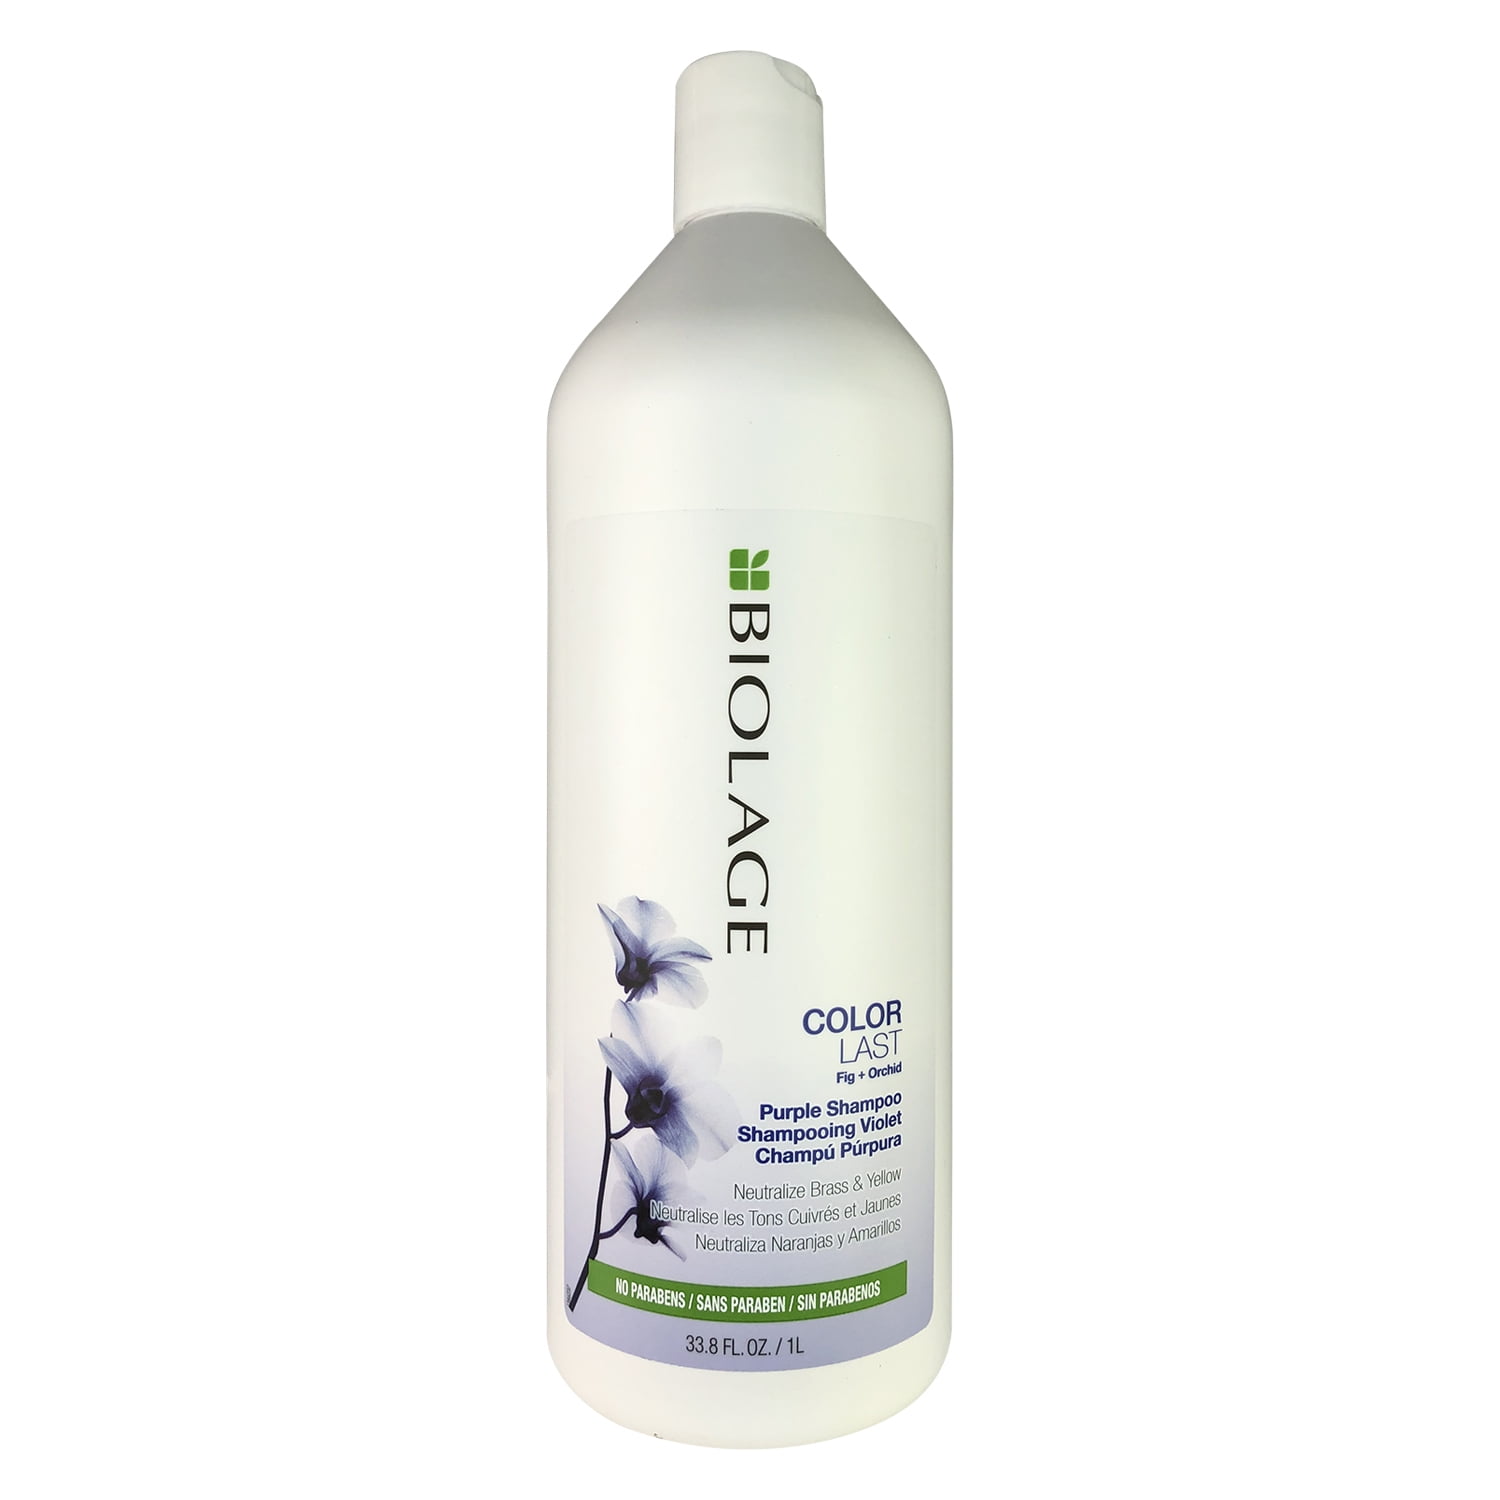 Matrix BIOLAGE ColorLast PURPLE Shampoo with Fig and Orchid for  Neutralizing Brass & Yellow,  FL Ozs / 1L 